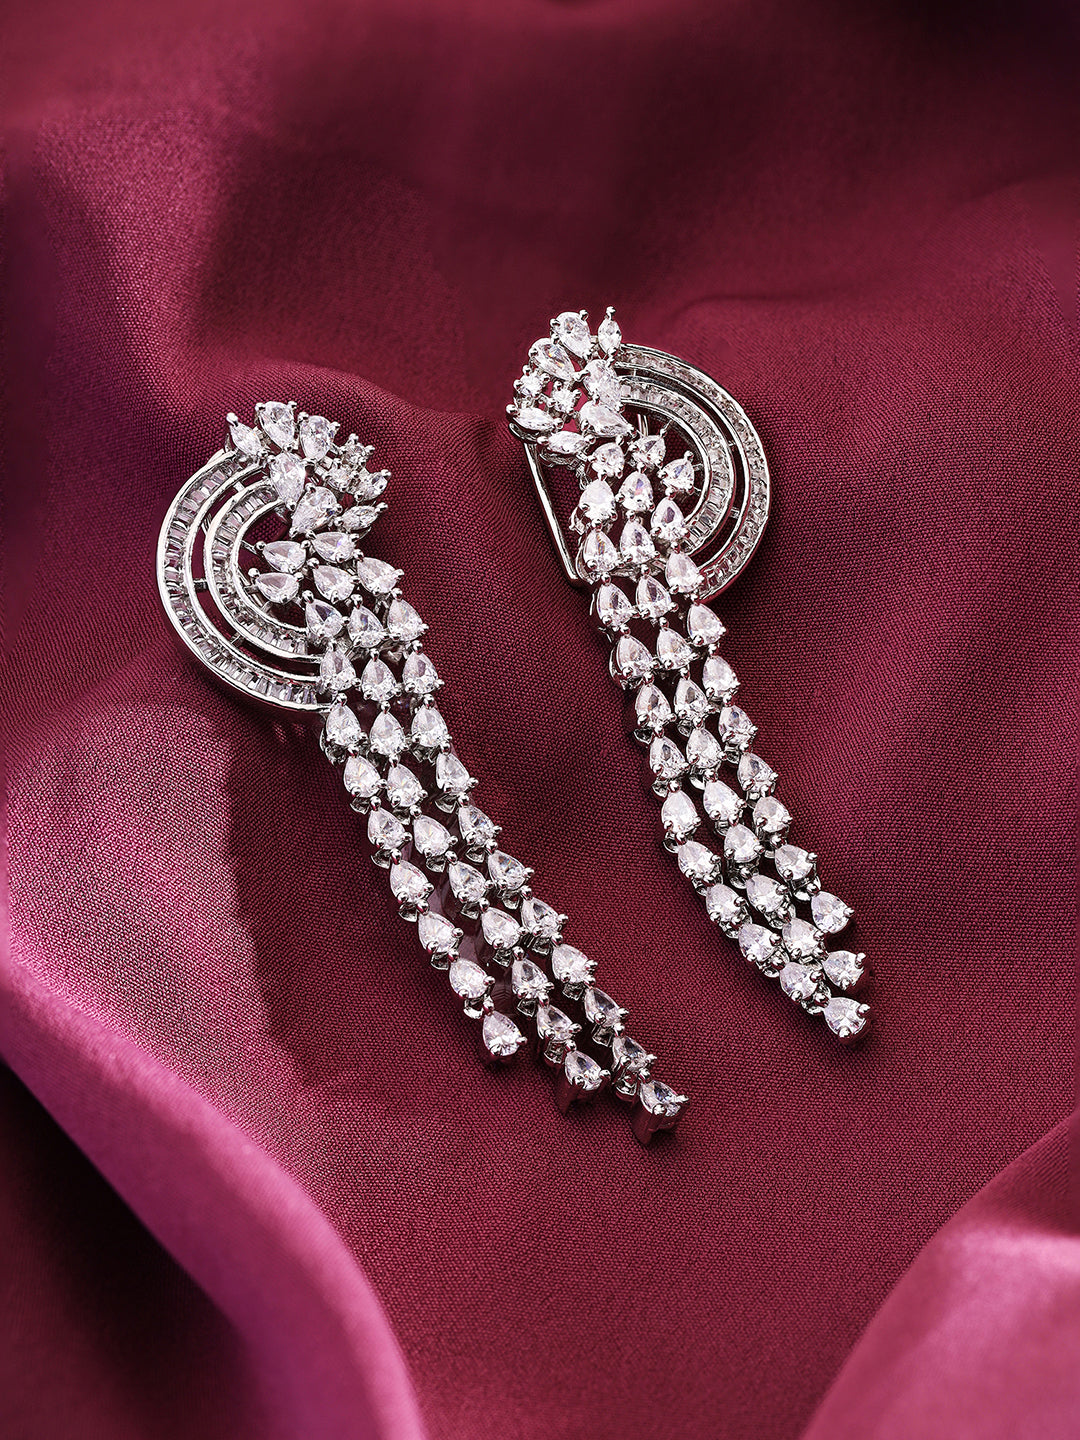 Priyaasi Silver-Plated Cuff Style Earrings Adorned with American Diamonds